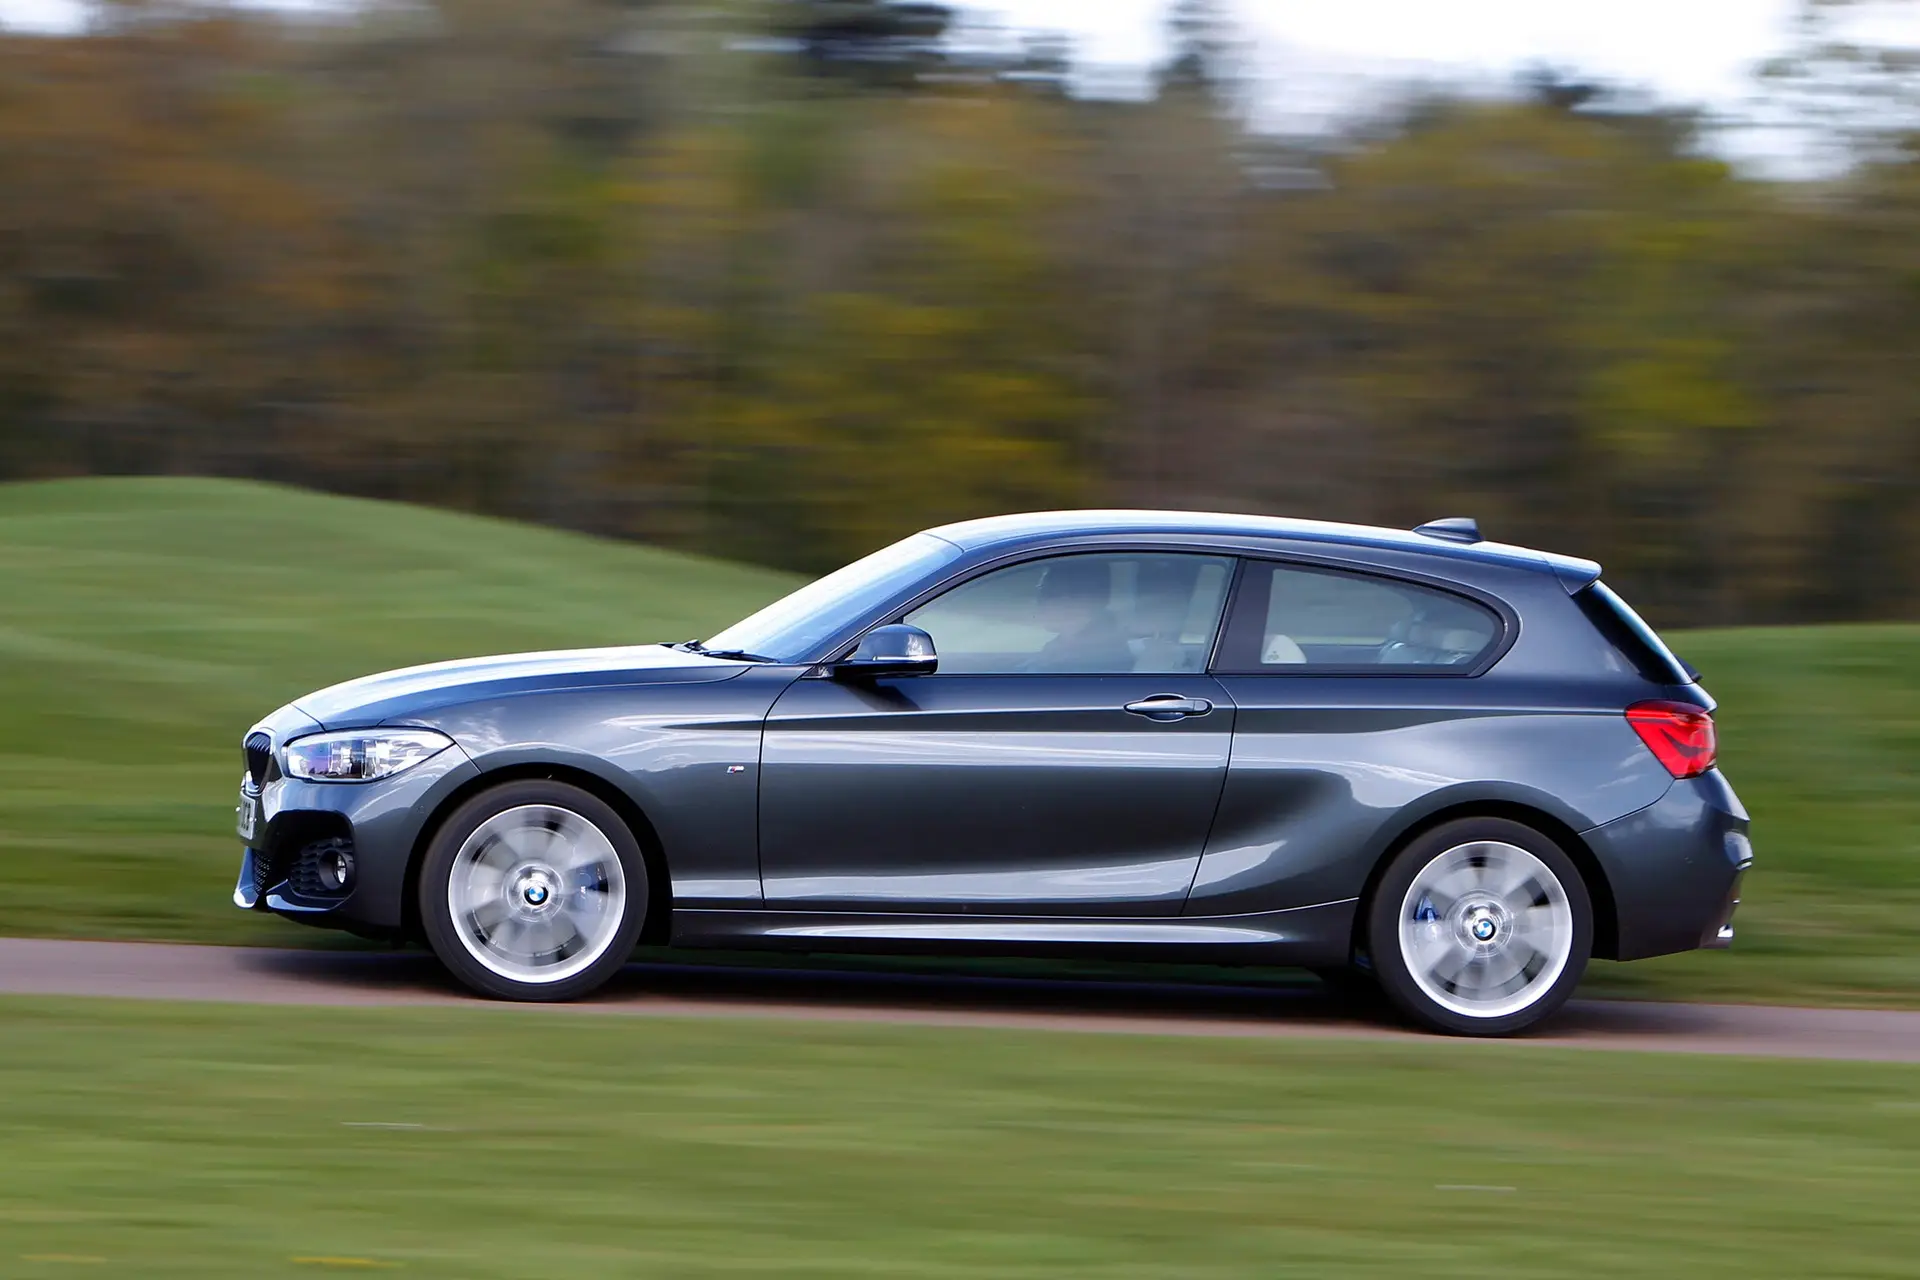 BMW 1 Series (2011-2019) Review: exterior side photo of the BMW 1 Series on the road